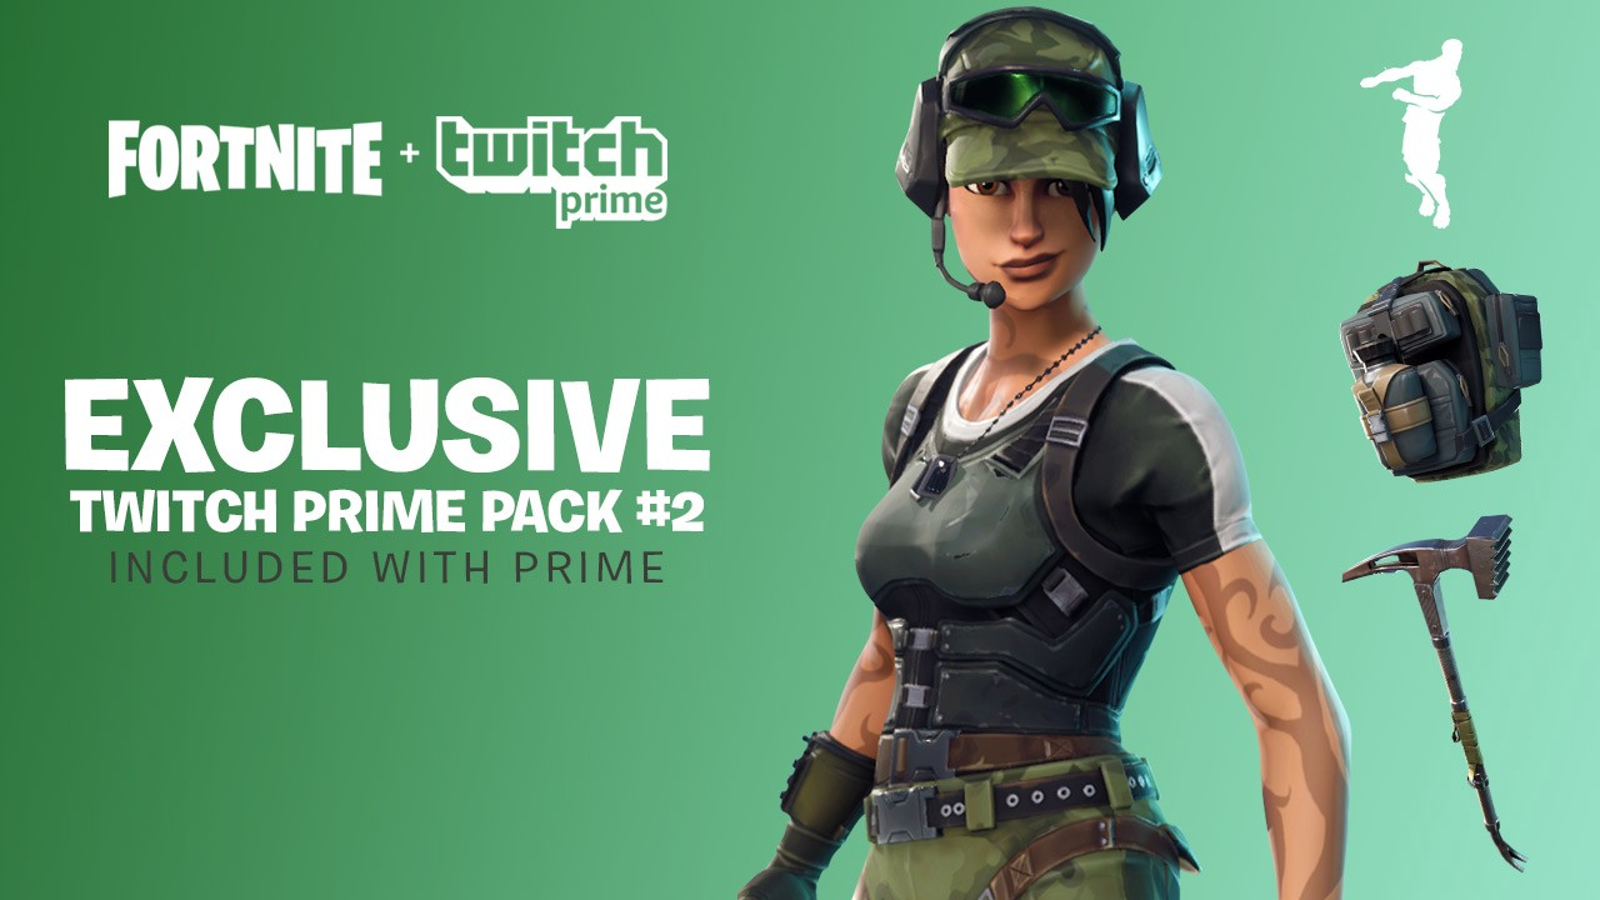 Twitch Prime subscribers get another batch of free Fortnite loot